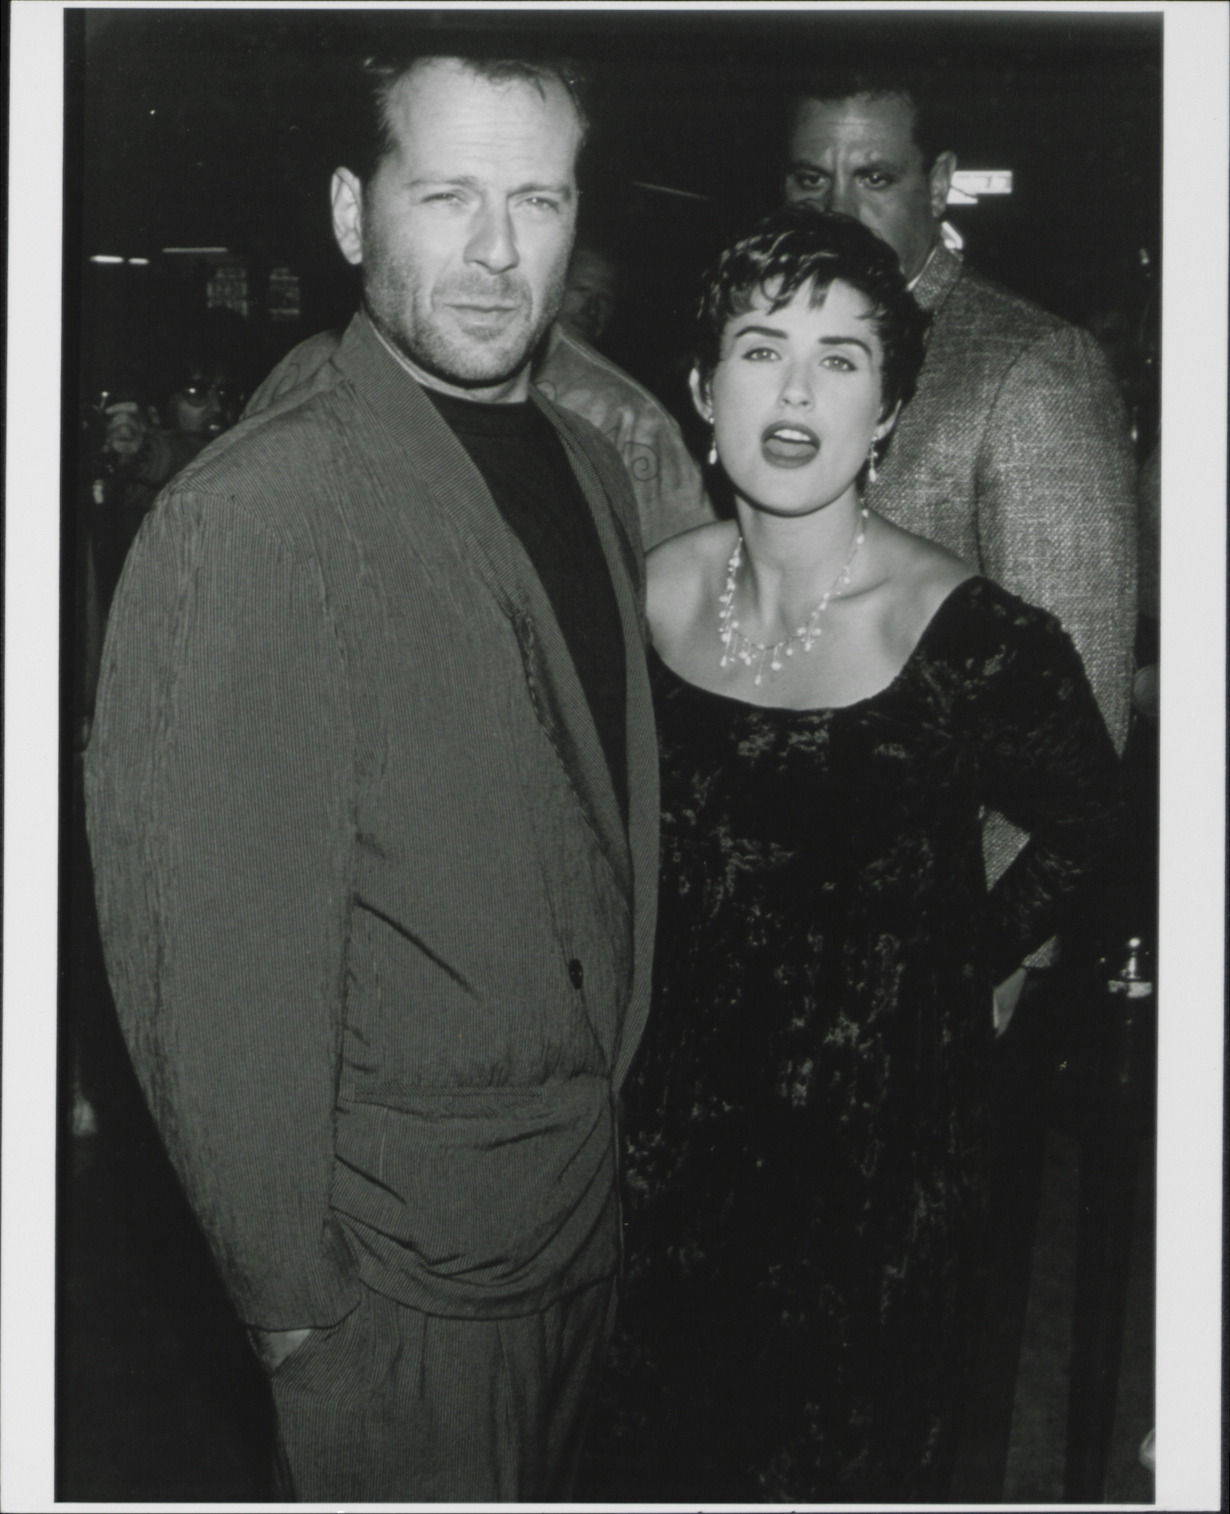 1988: Bruce Willis and Demi Moore